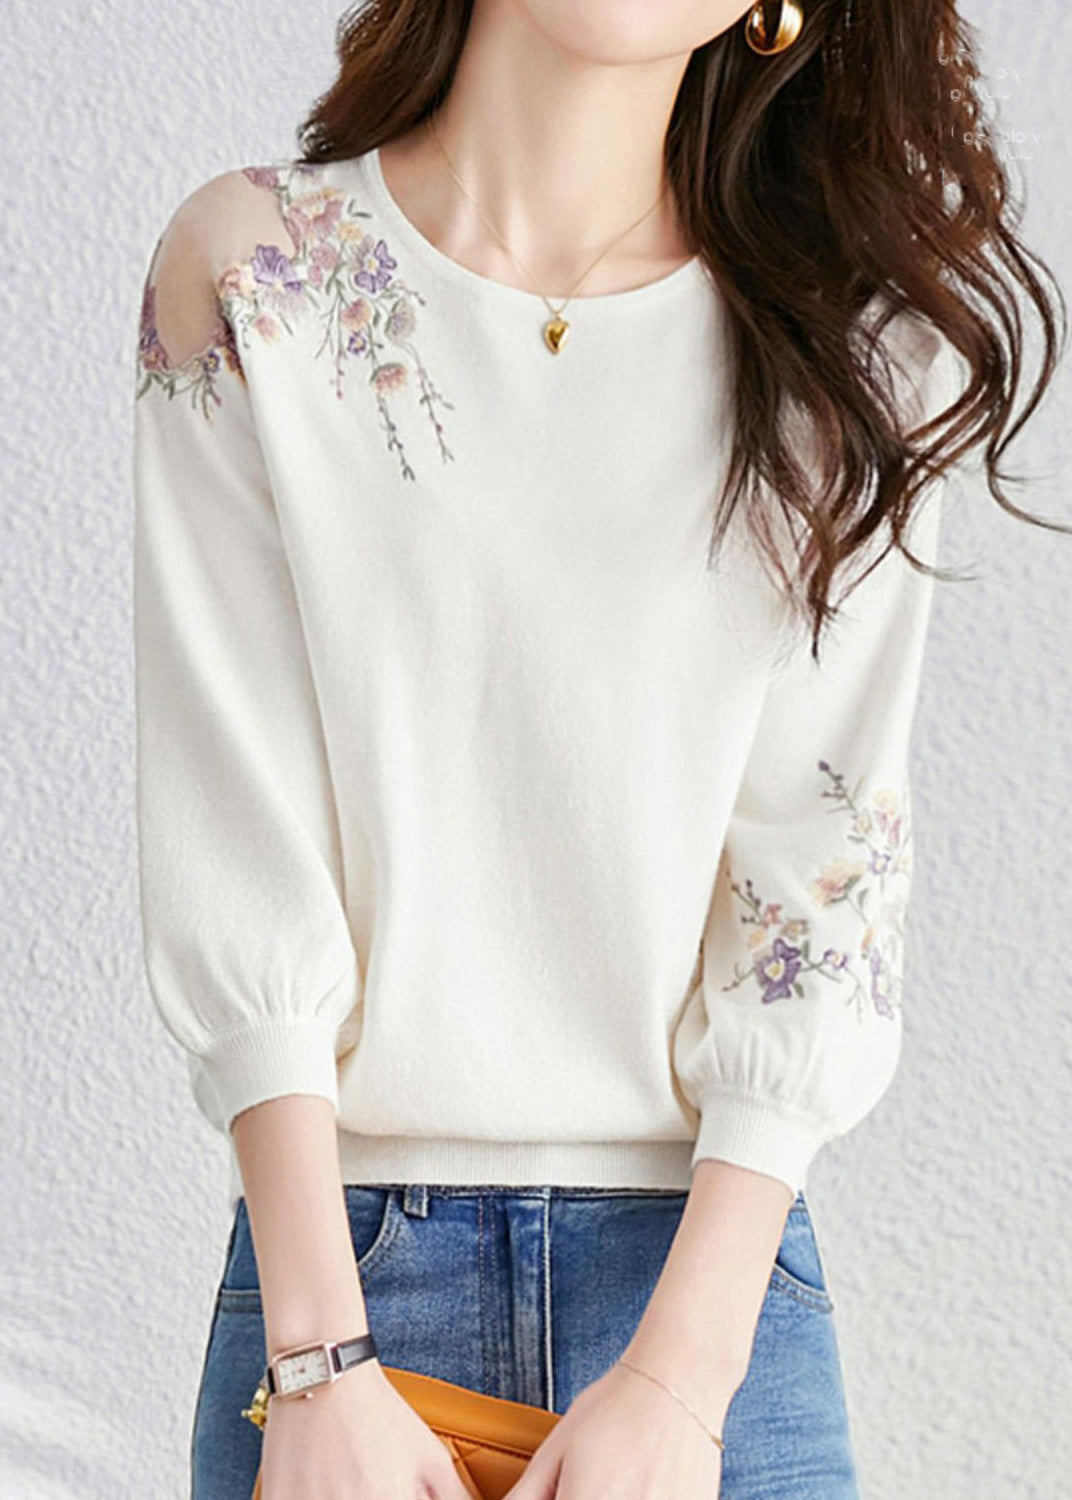 French White O-Neck Embroideried Versatile Knit Top Fall